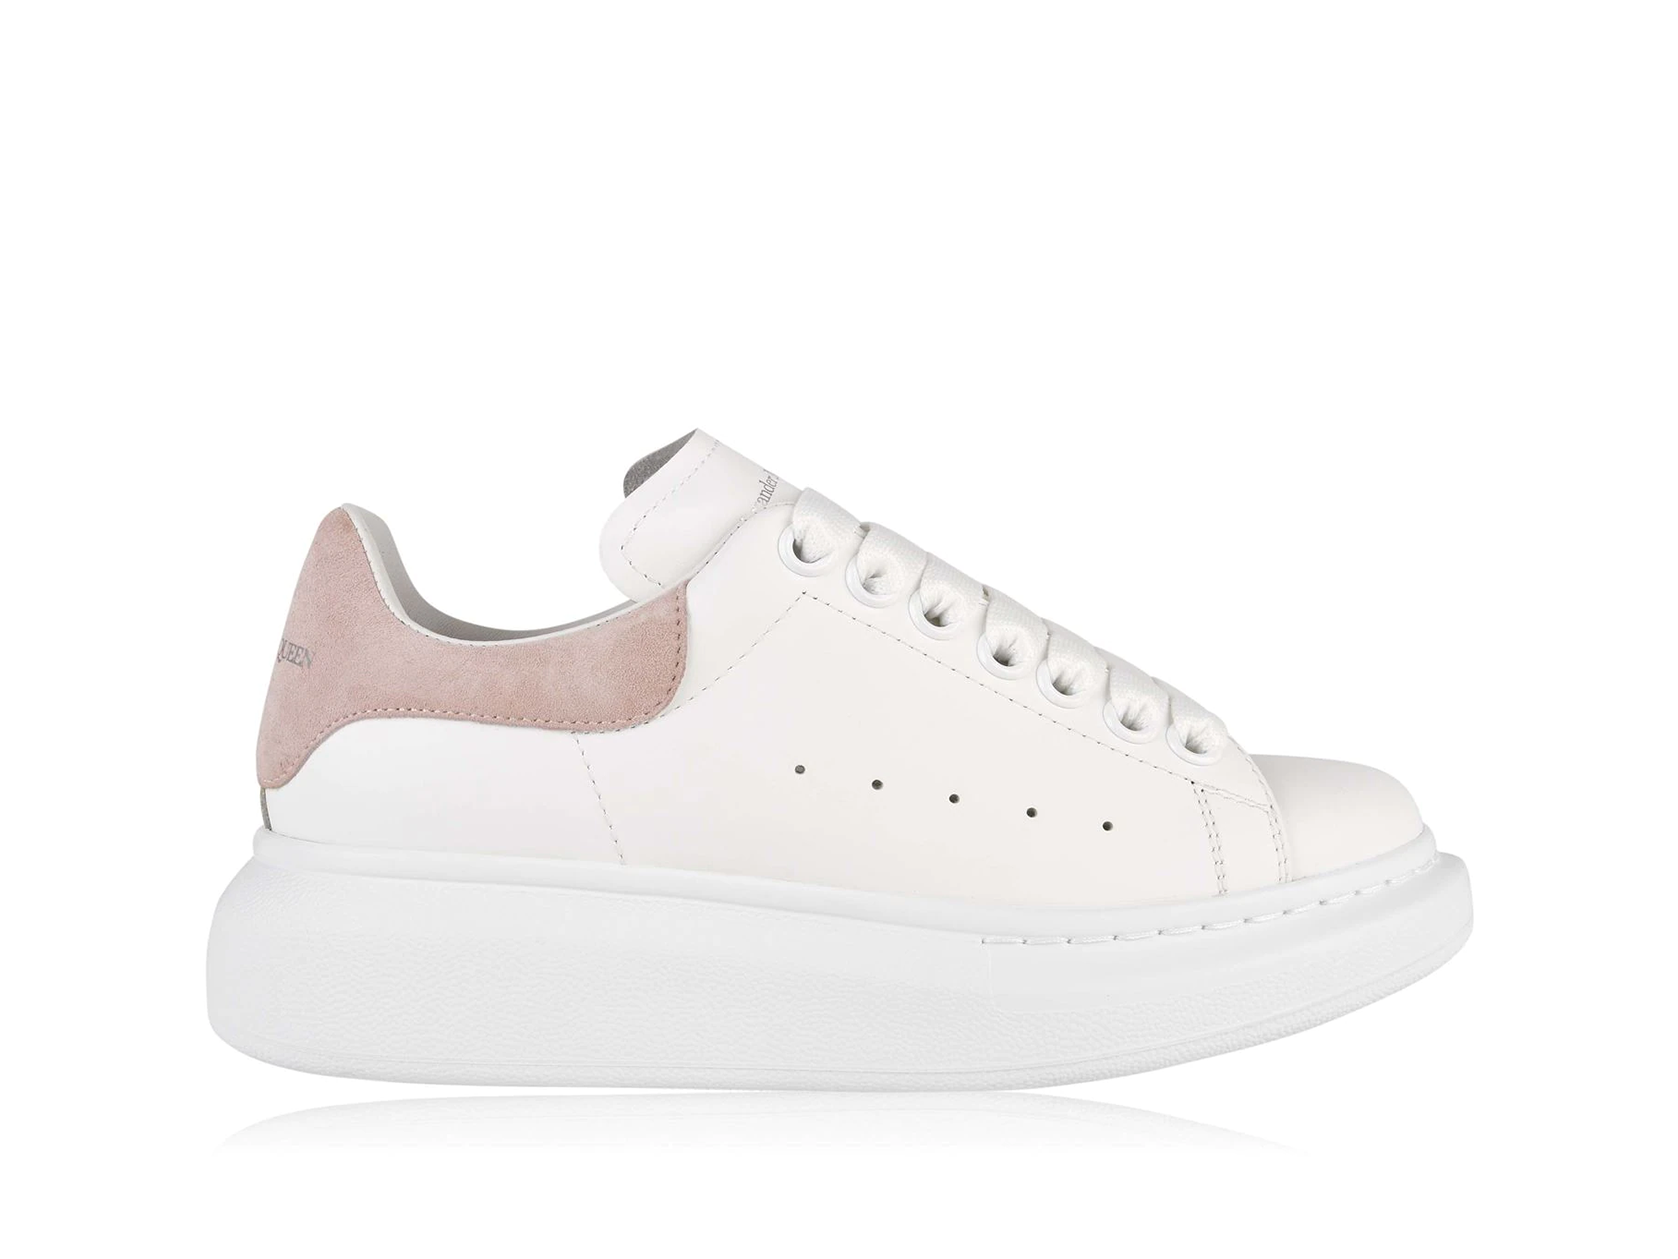 Double Boxed  419.99 Alexander McQueen Oversized White Pink Women's Double Boxed